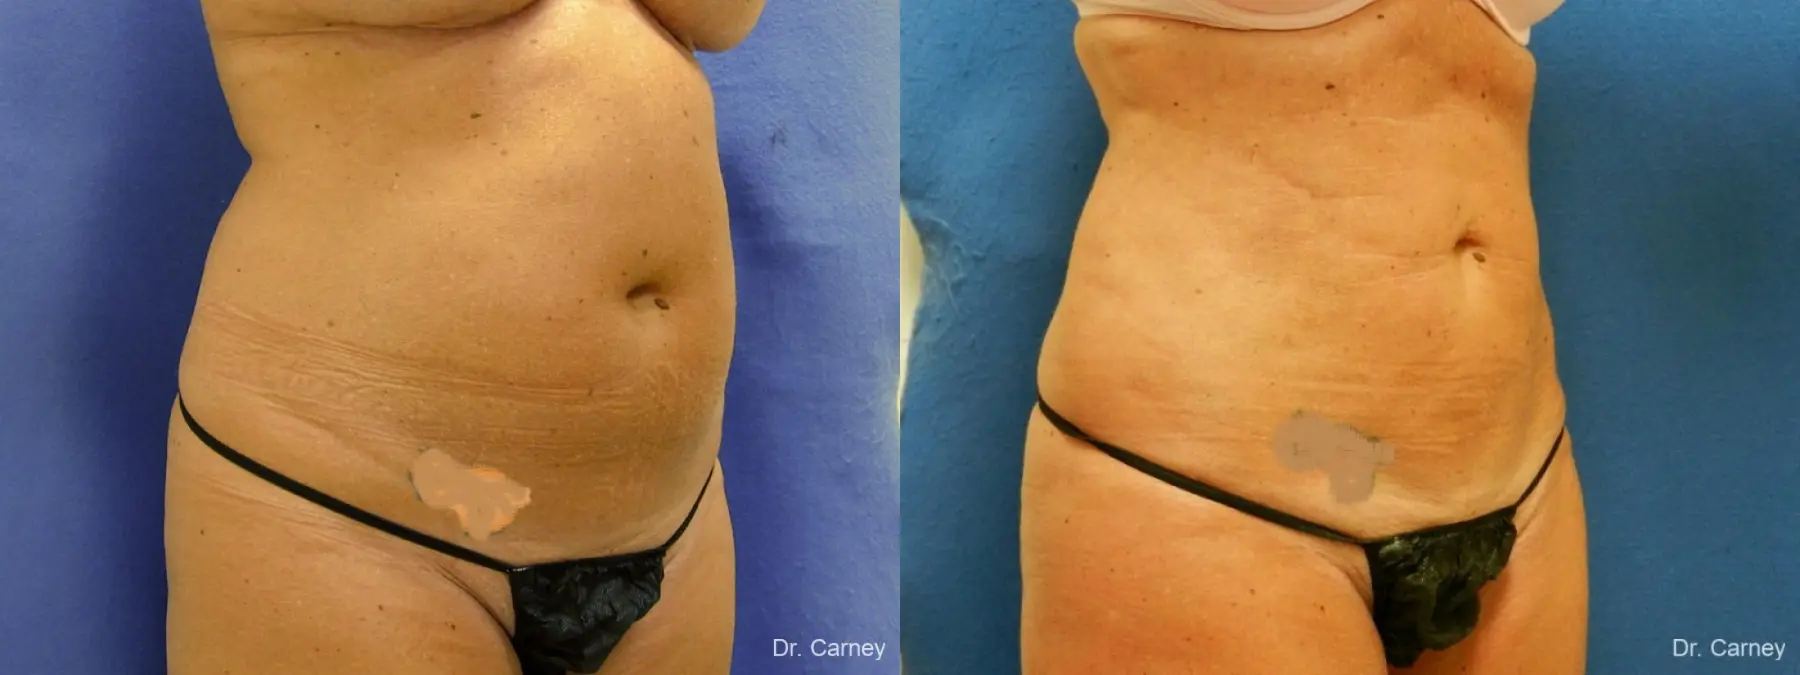 Virginia Beach Liposuction 1279 - Before and After 1